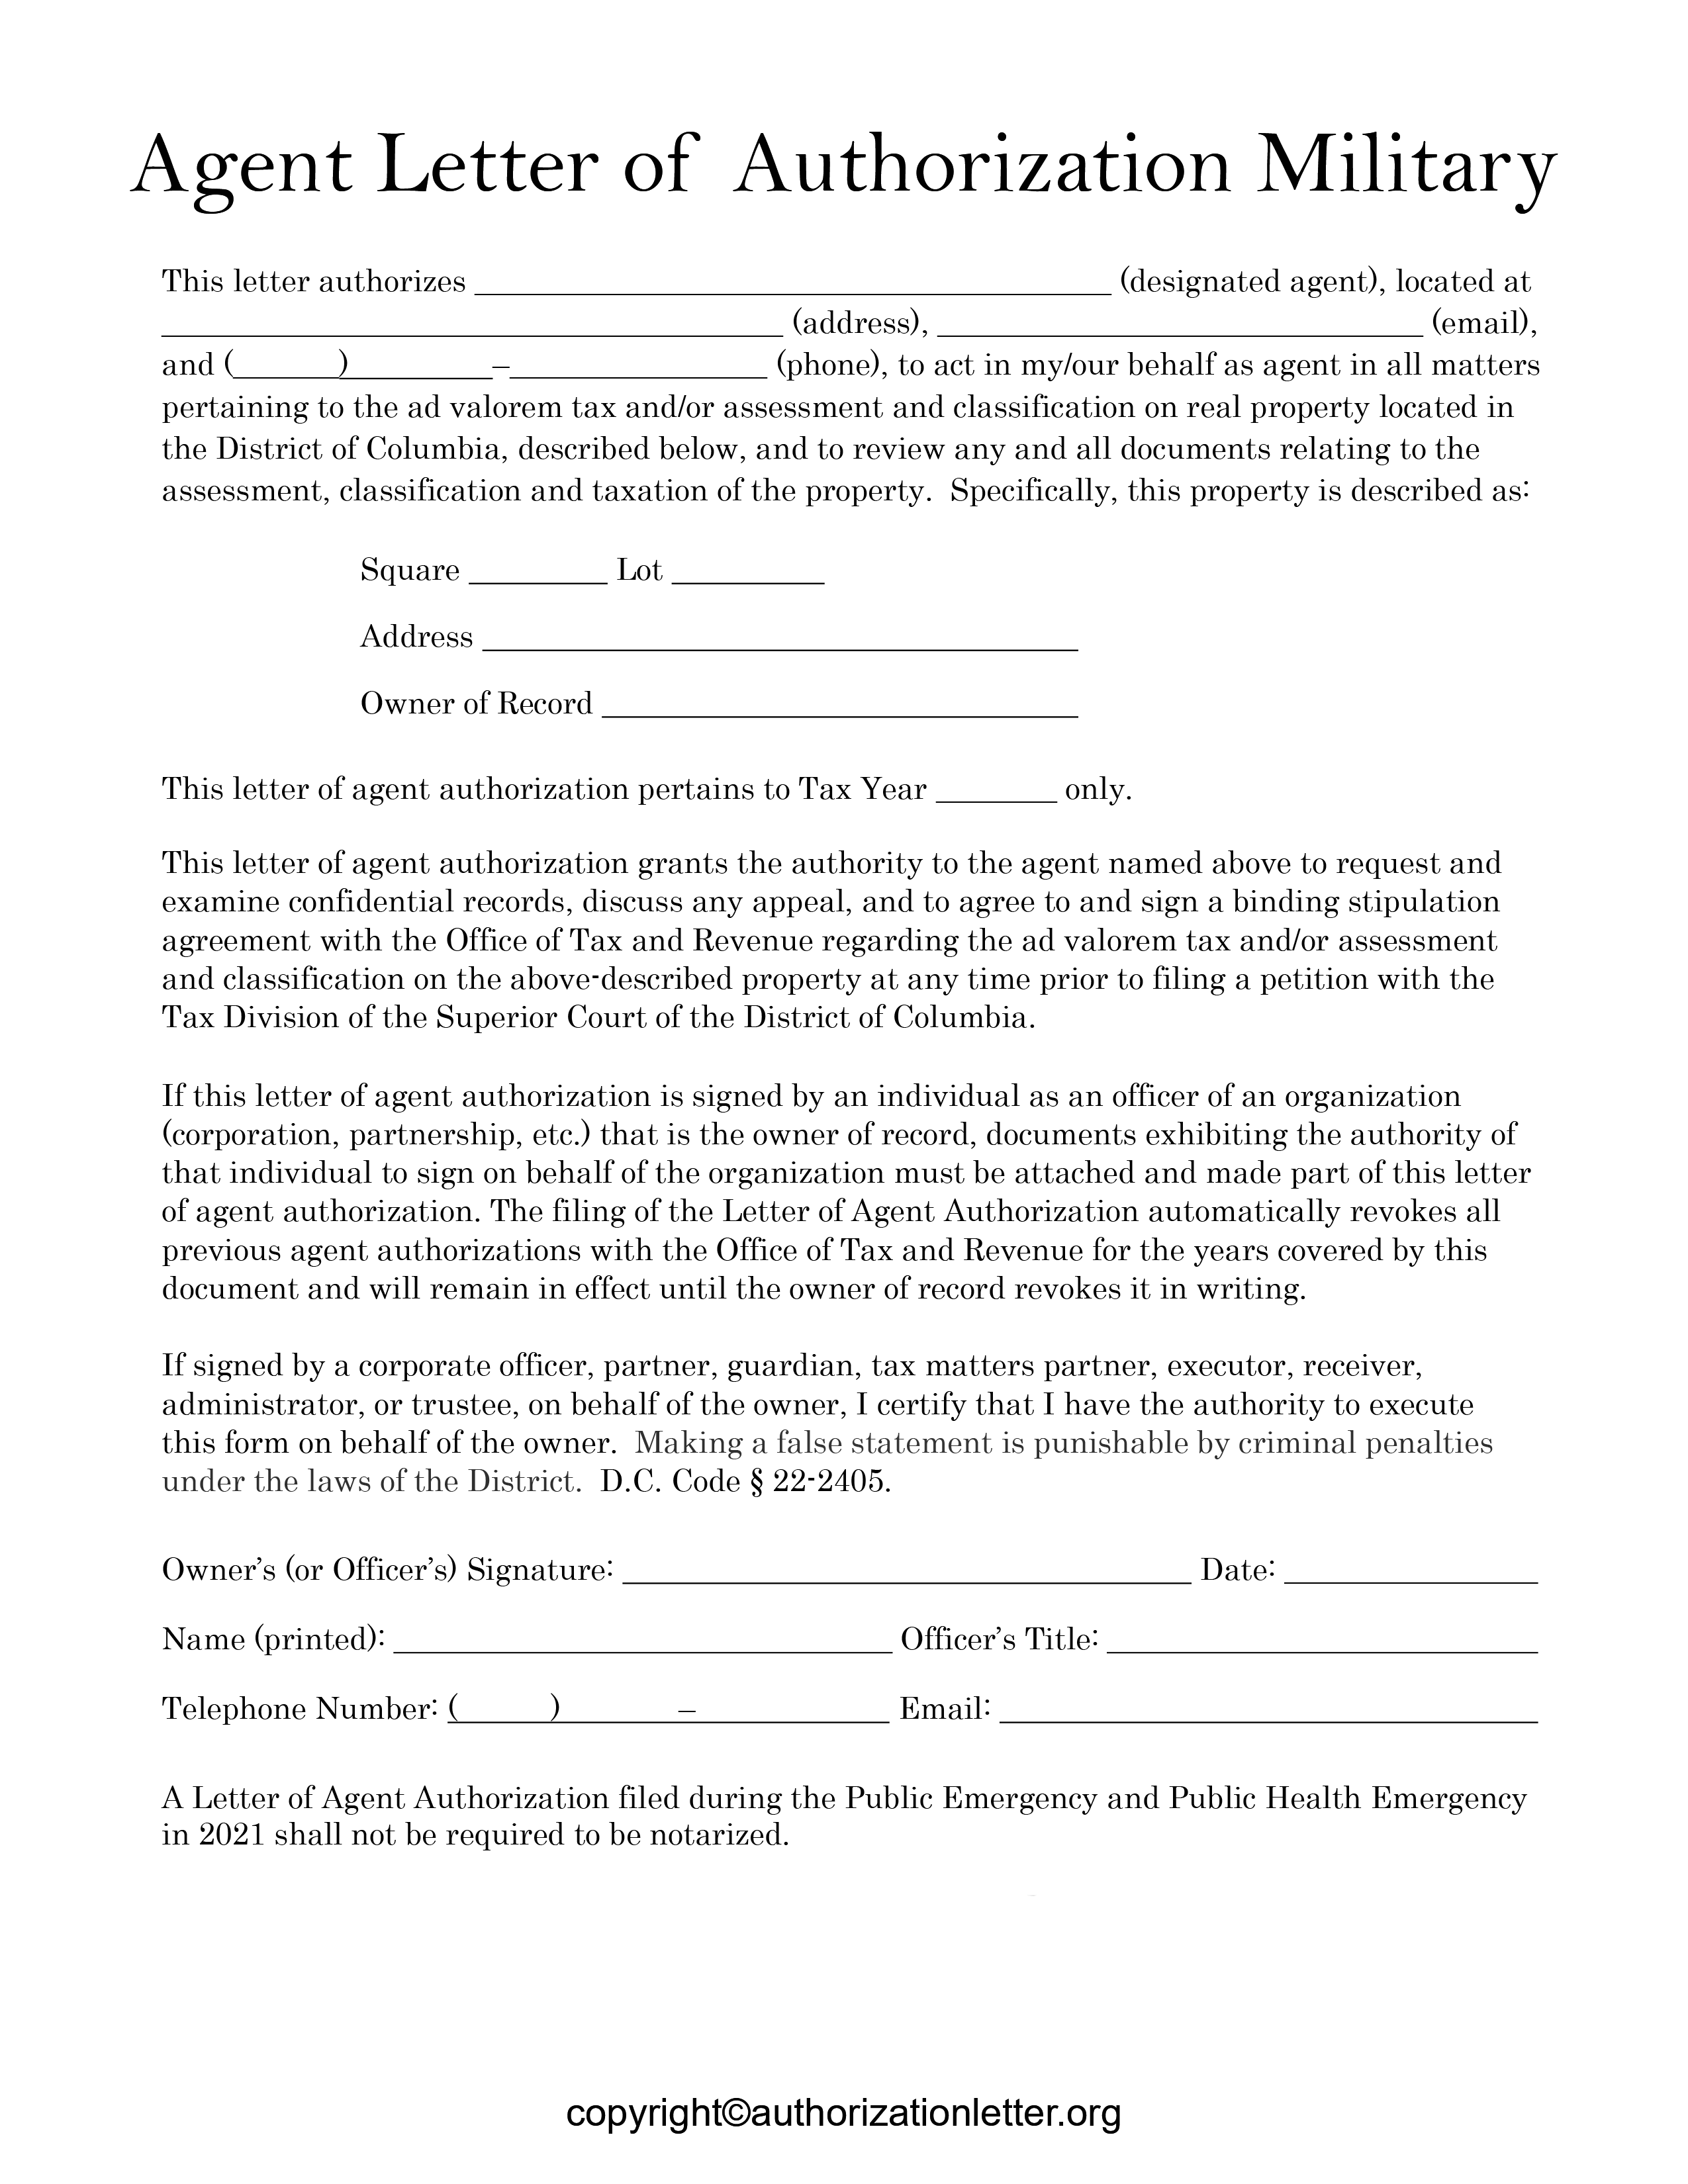 Printable Military Agent Letter of Authorization